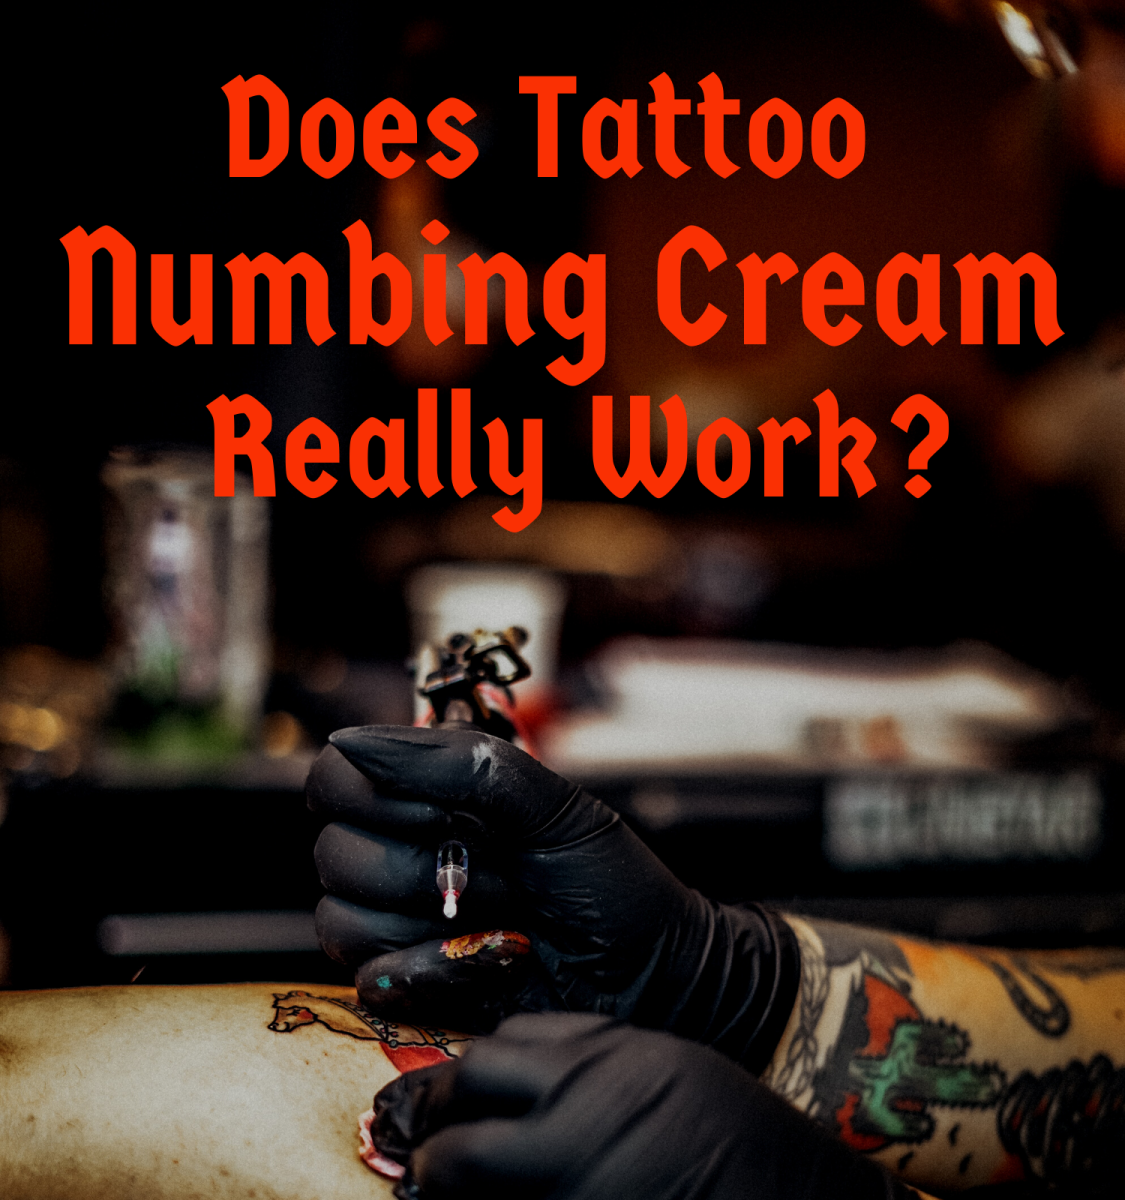 How to Stop Tattoo Pain: Numbing Cream and Dr. Numb - TatRing